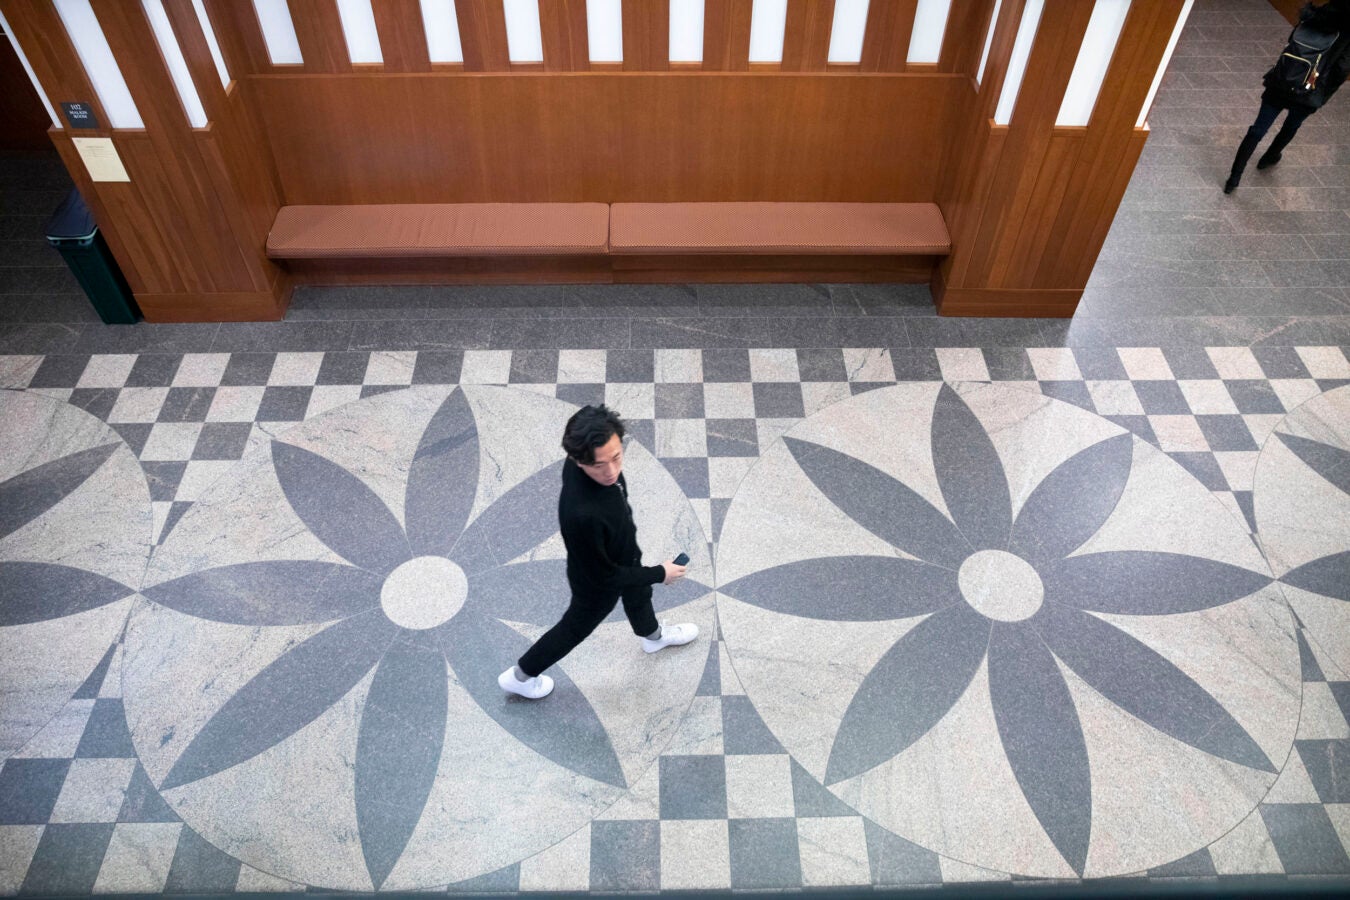 Pictured from above, a person walks over the lotus stone walkway in Hauser Hall.